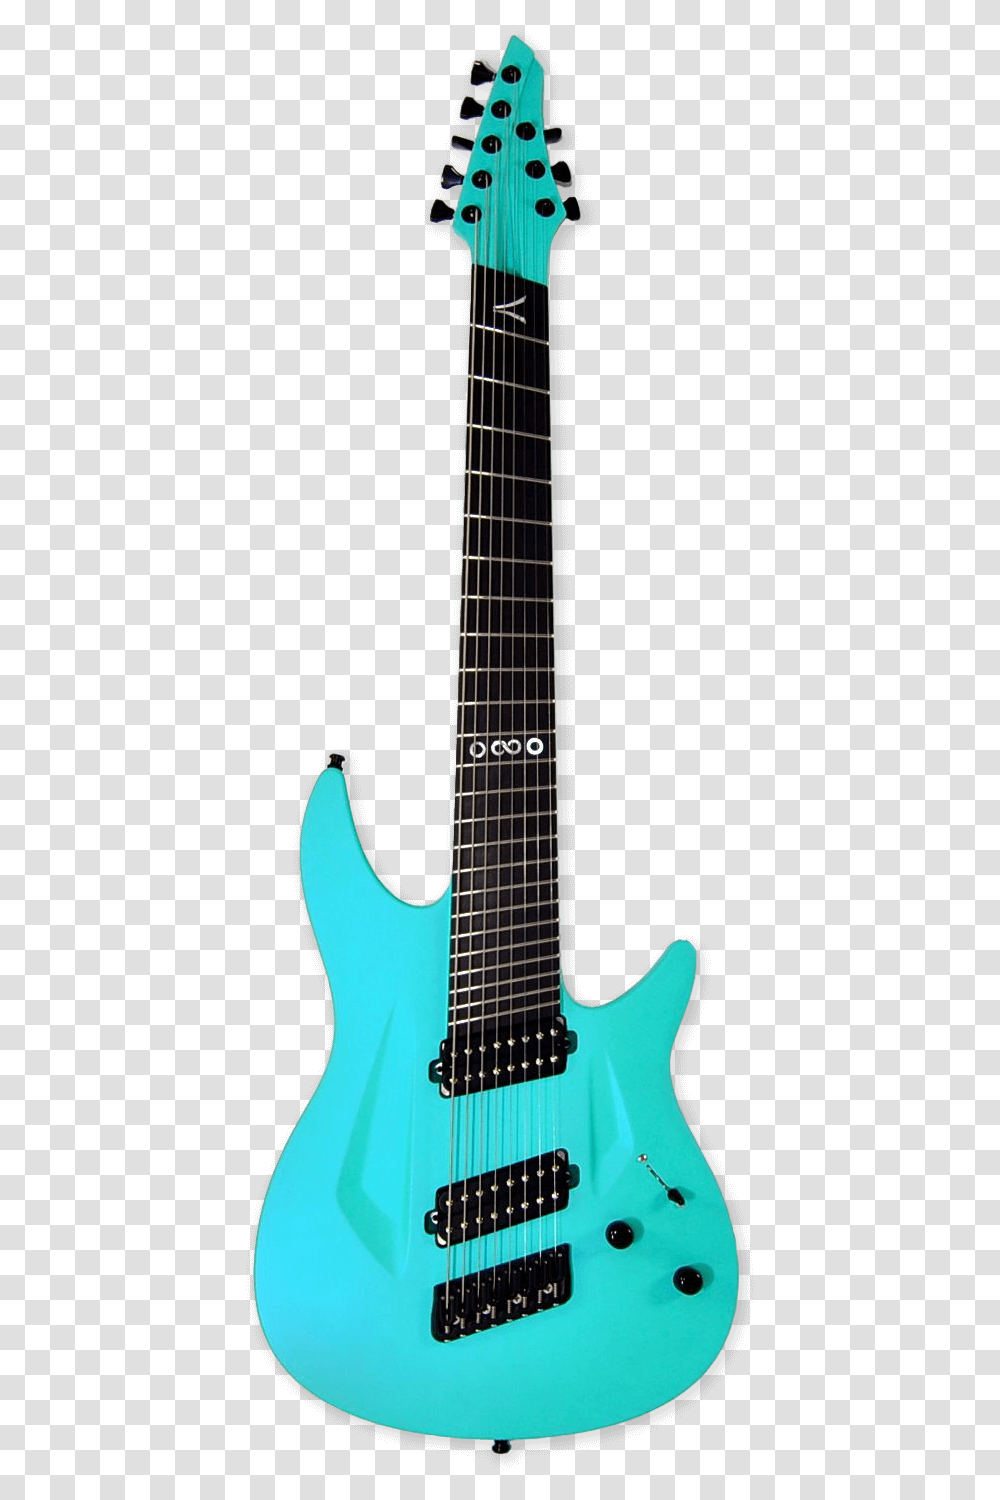 I Don't Buy Guitarsgear Much Anymore But The Gear, Leisure Activities, Musical Instrument, Bass Guitar, Electric Guitar Transparent Png